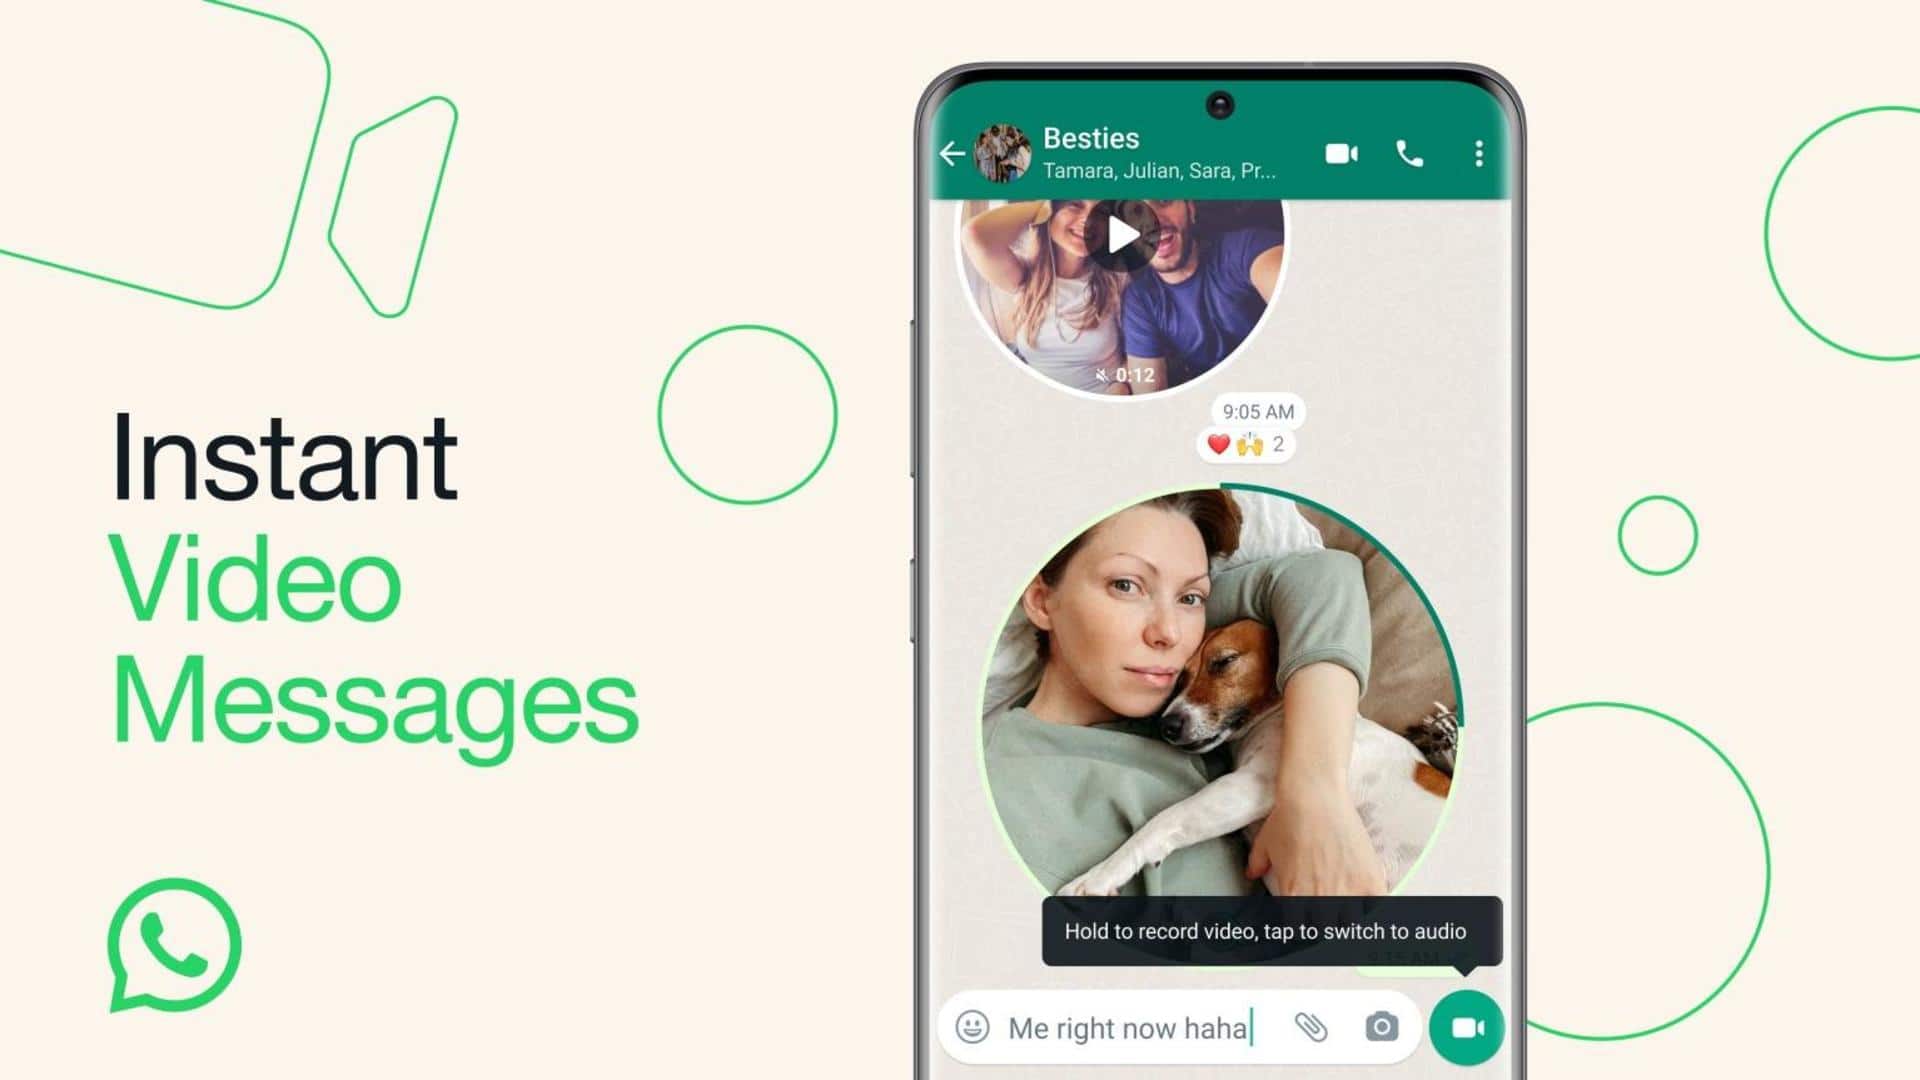 WhatsApp now allows instant video messaging: How to use it